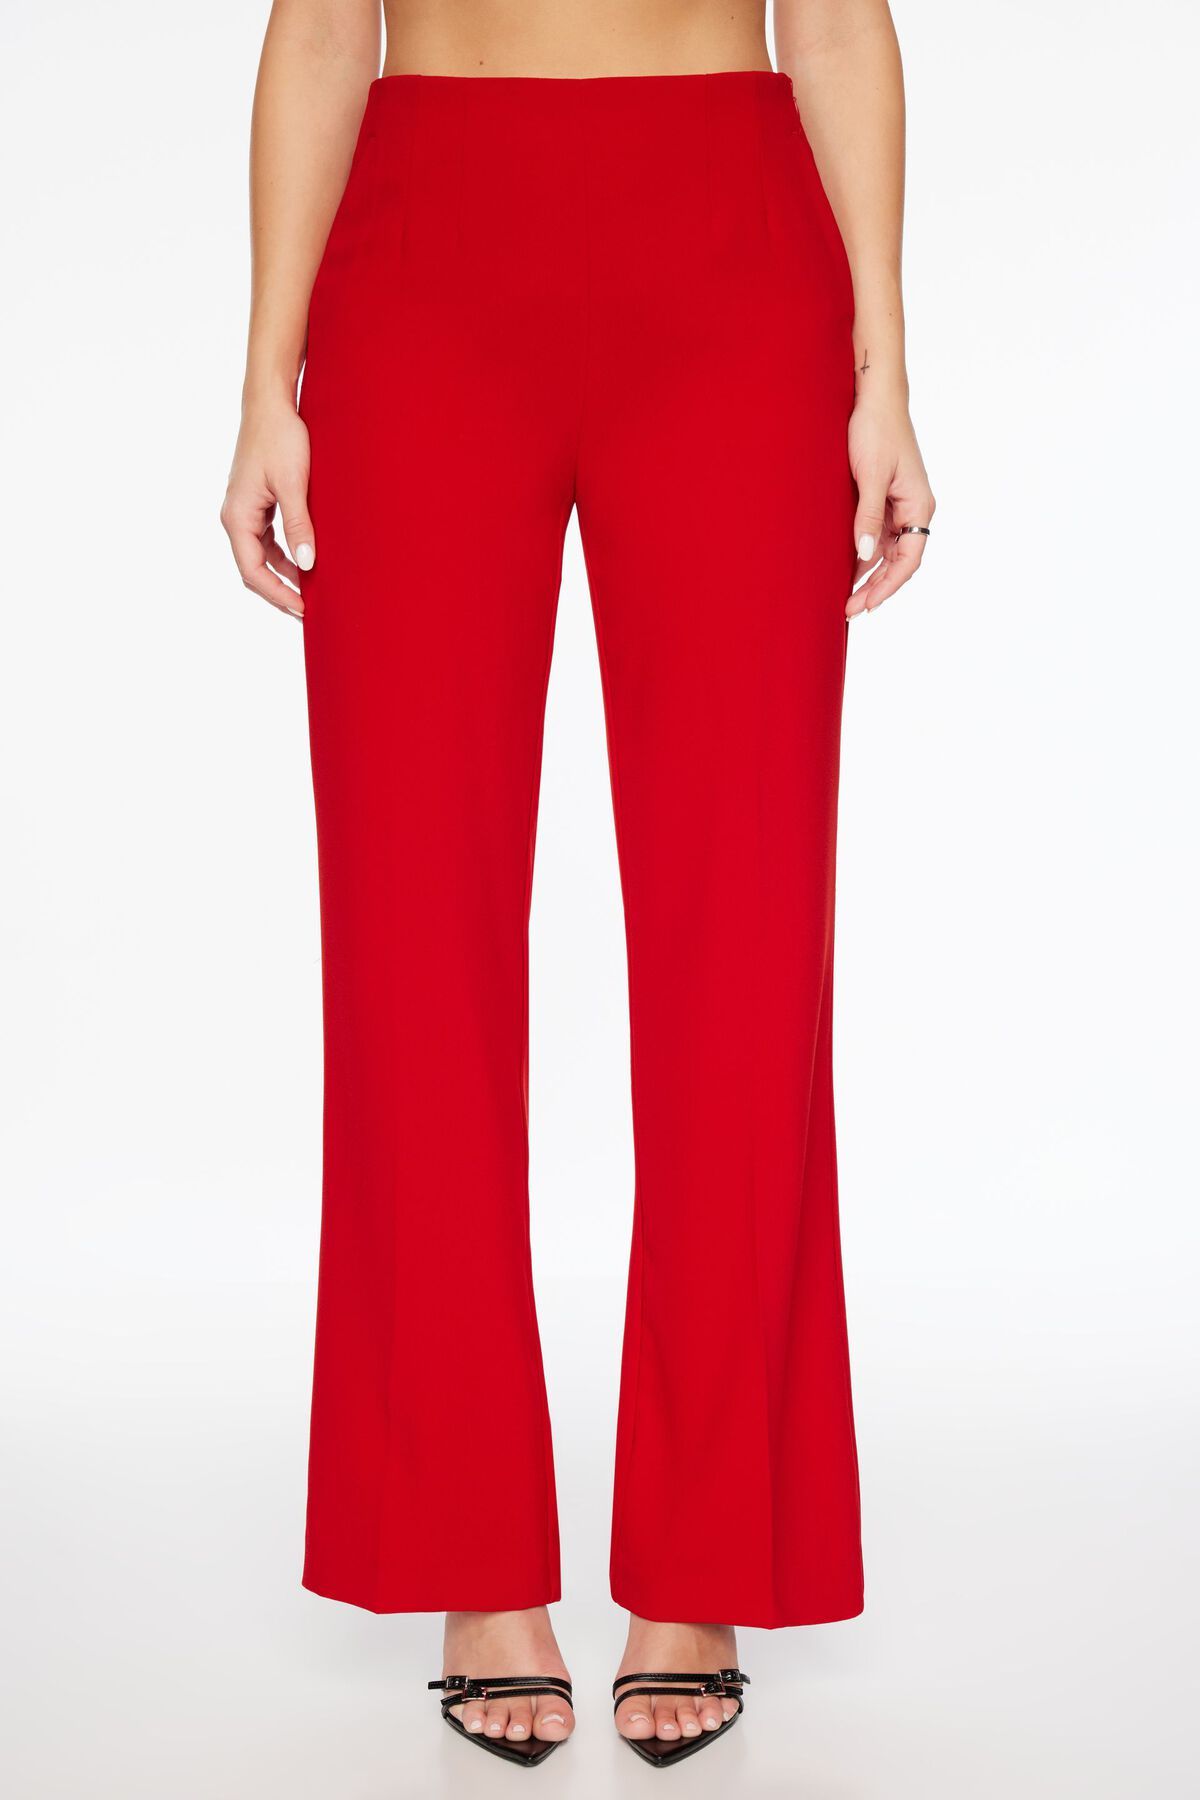 Red High Waisted Vintage Pants 